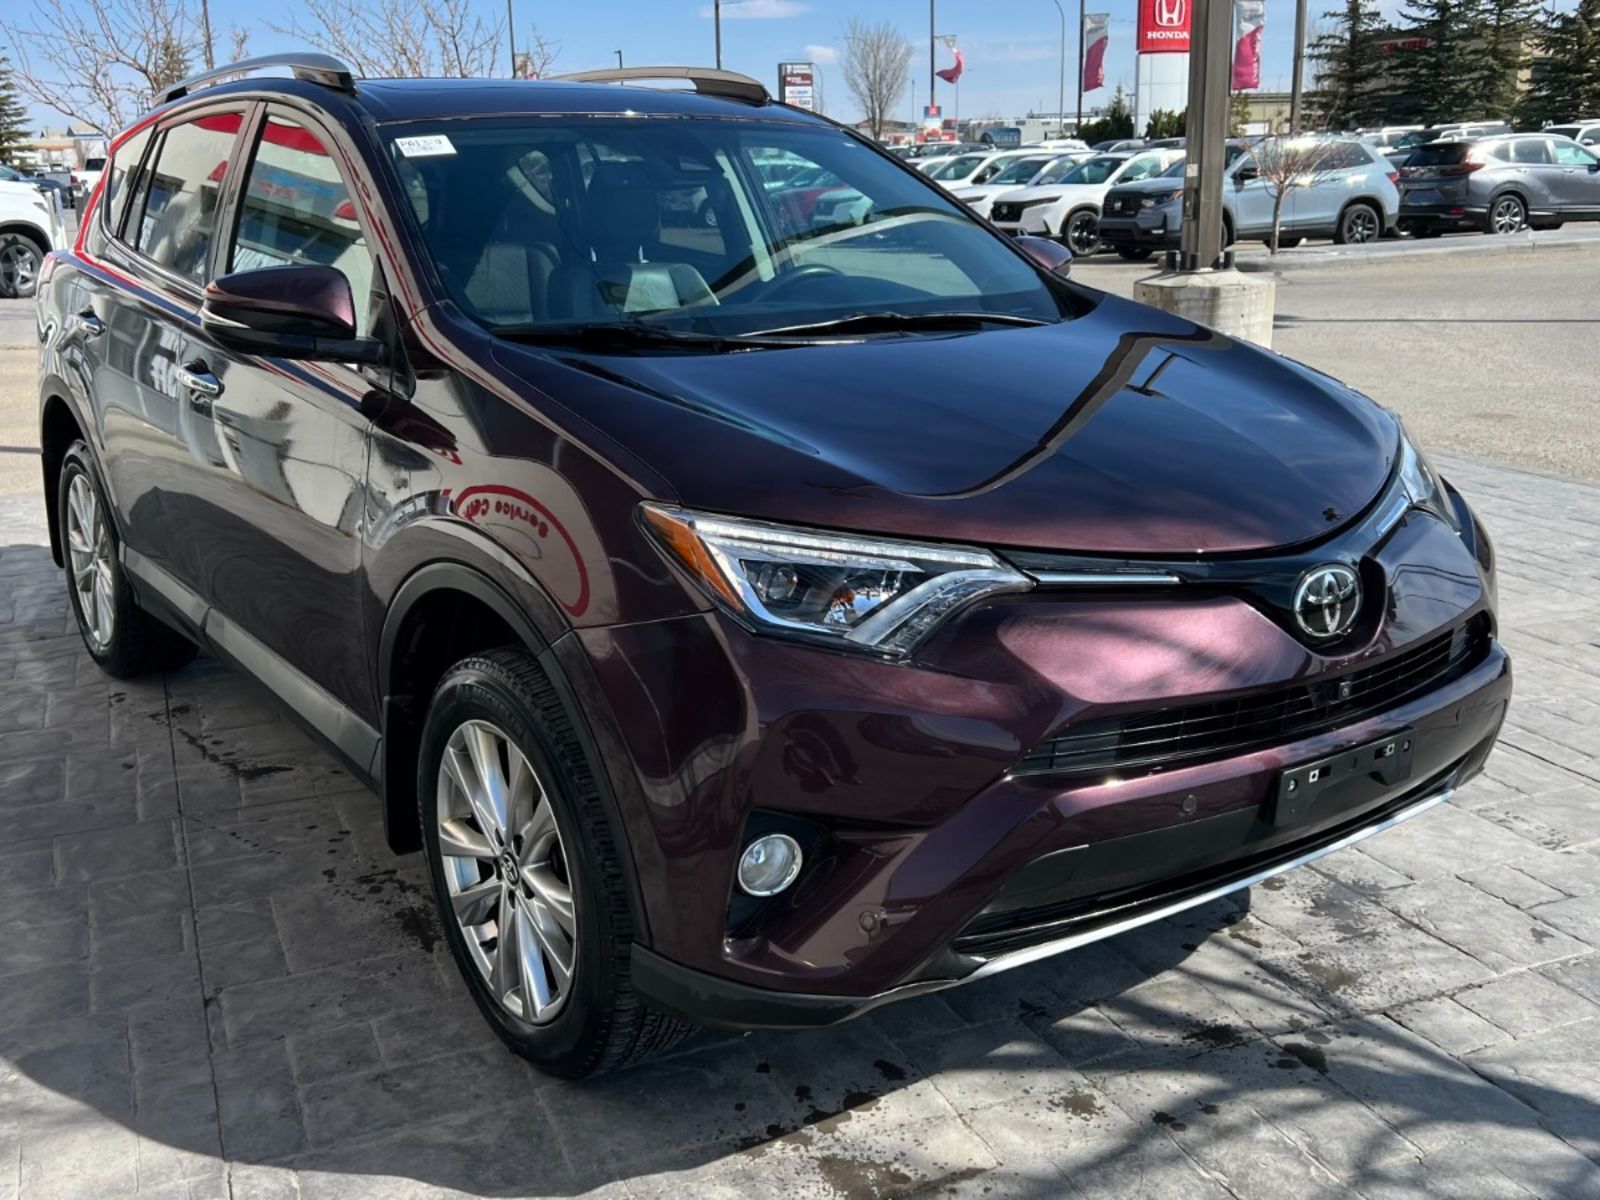 2018 Toyota RAV4 Limited - One Owner, No Accidents, Navigation